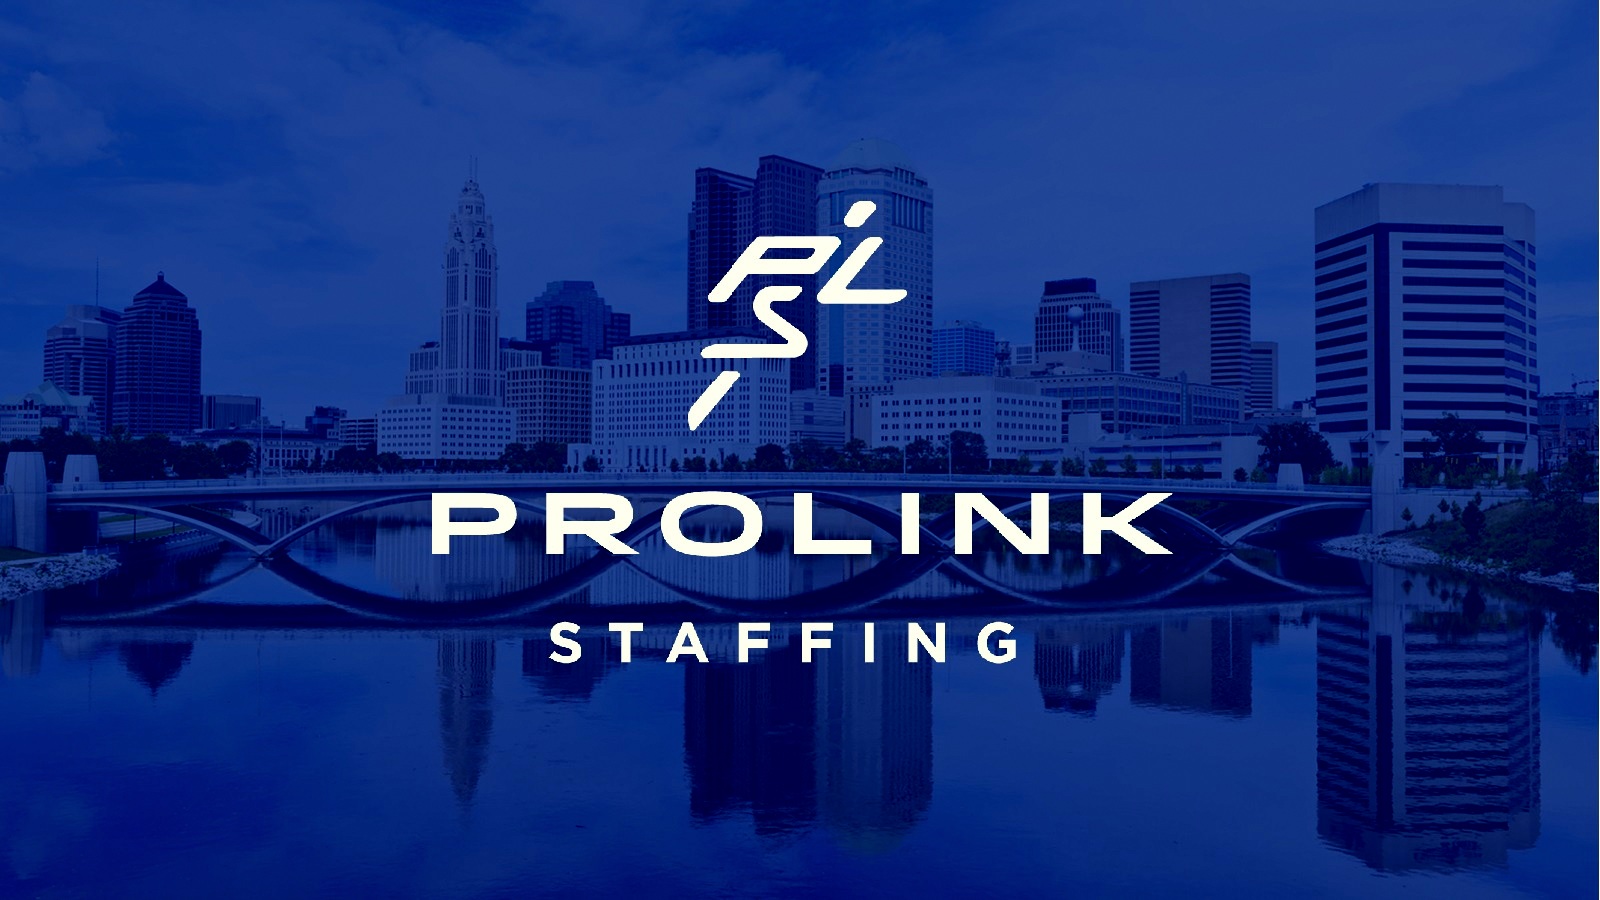  Search for your ideal healthcare job at ProLink Staffing, Cincinnati, OH